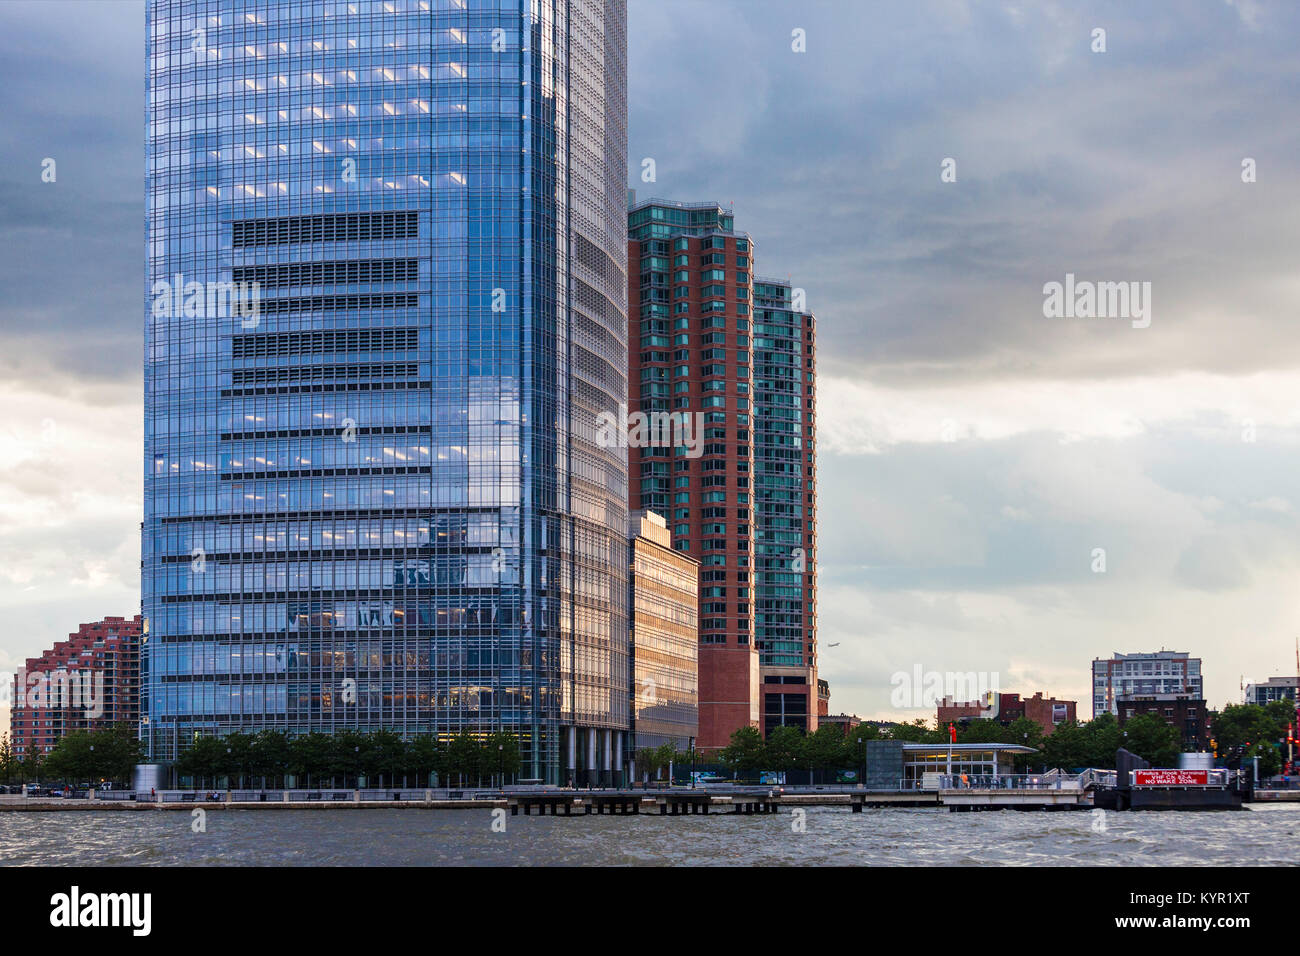 Jersey City Waterfront, Goldman Sachs Tower in the foreground, New Jersey, USA Stock Photo